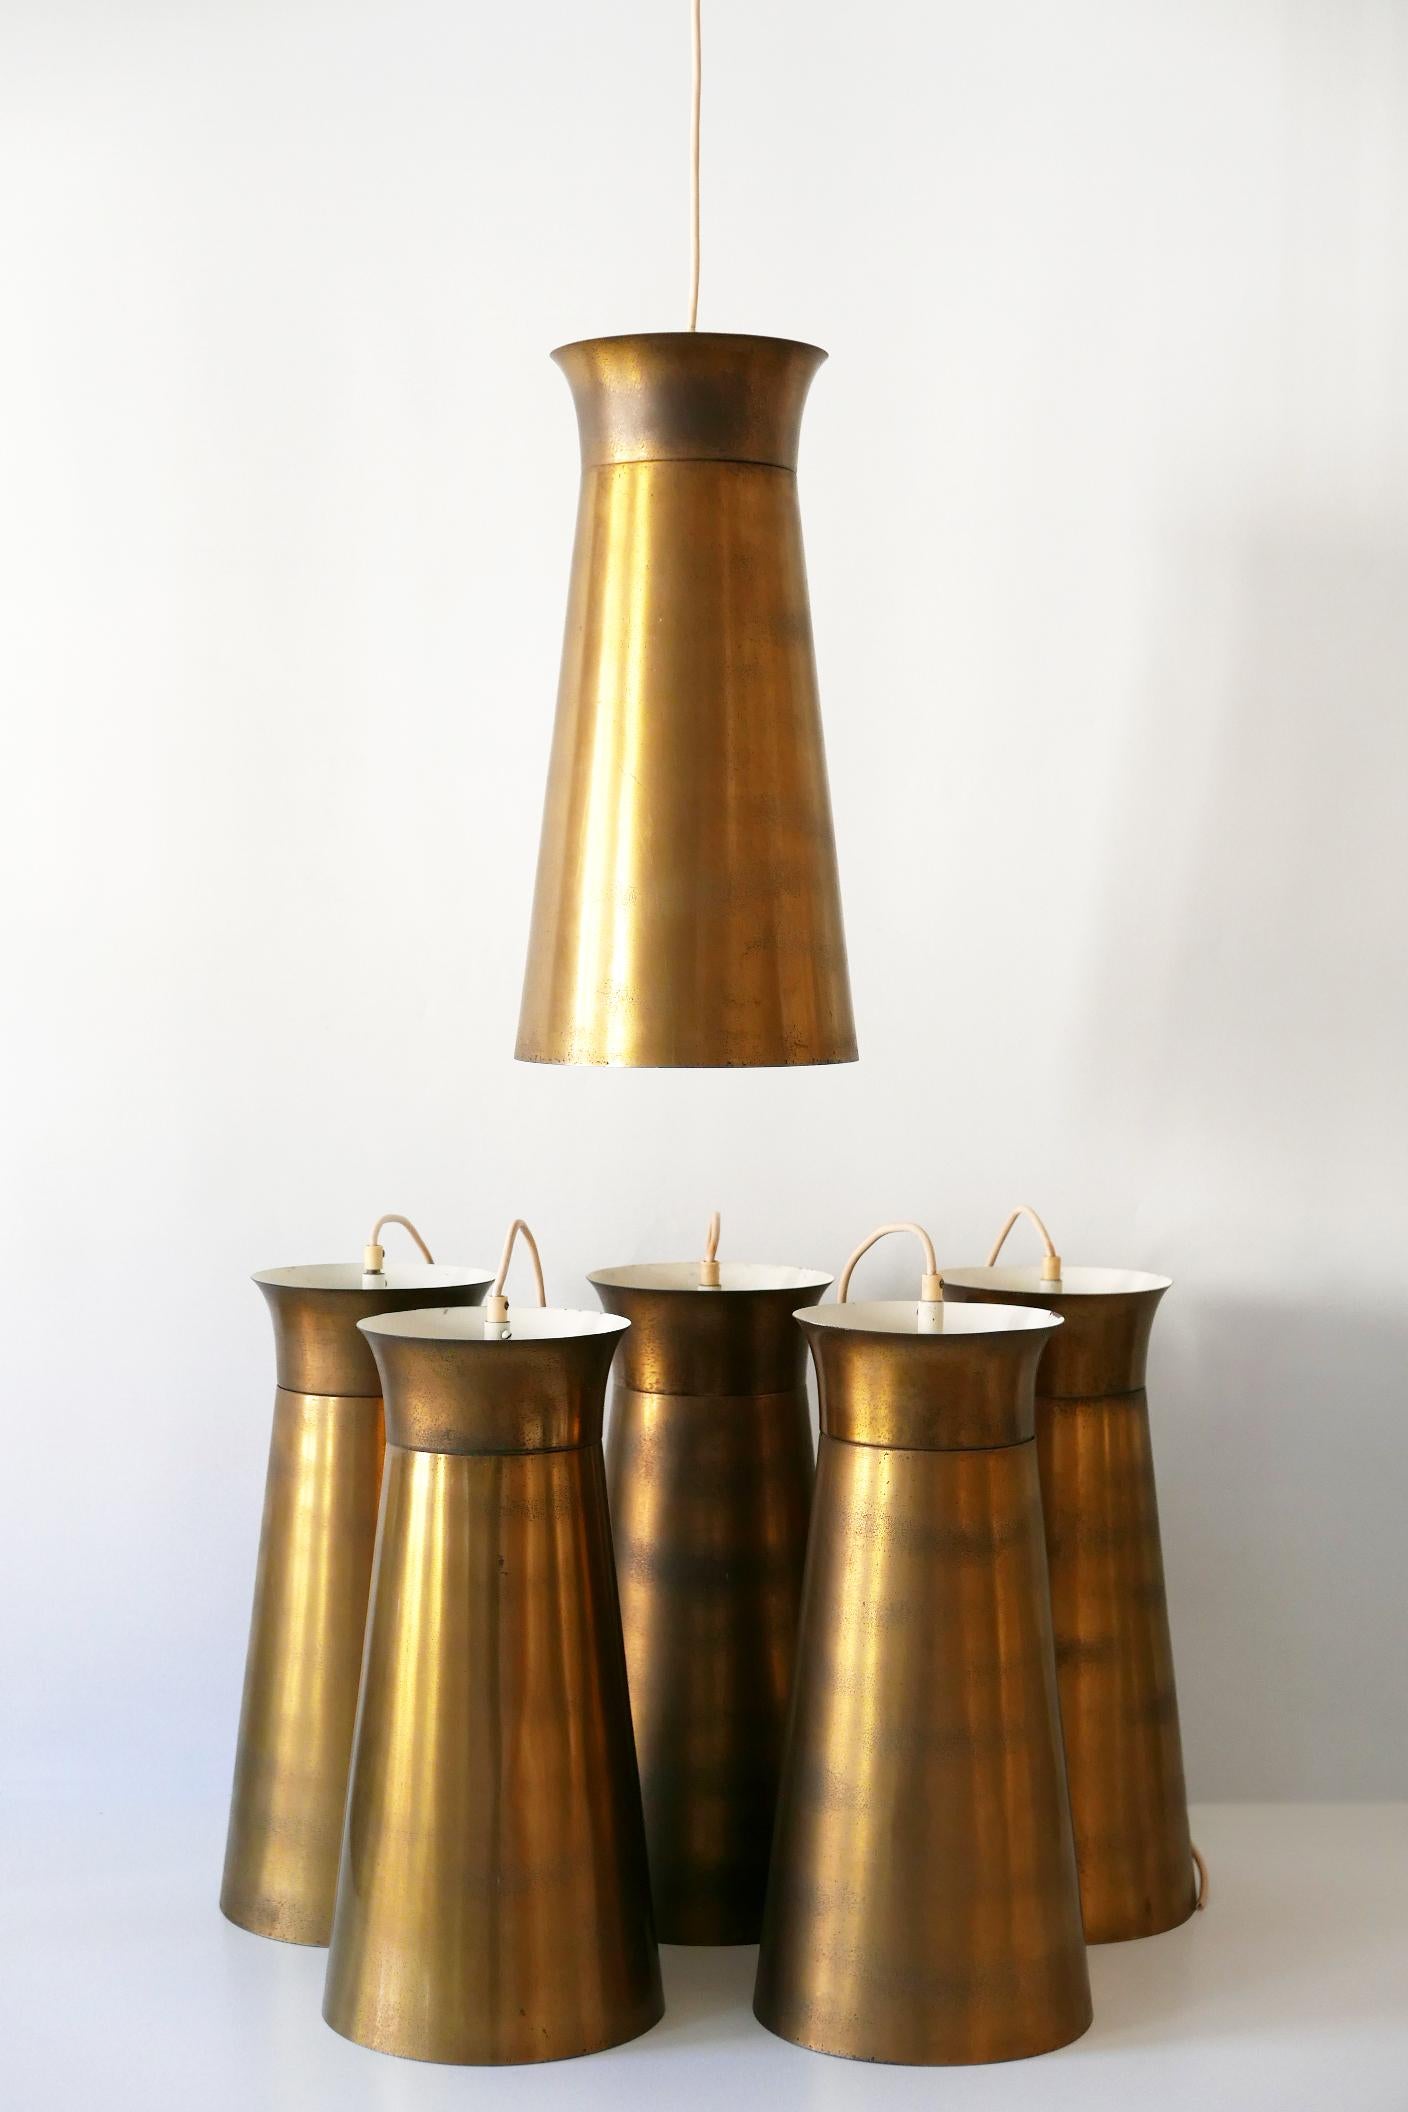 Elegant Mid-Century Modern Brass Pendant Lamps or Hanging Lights, 1950s, Germany In Good Condition For Sale In Munich, DE